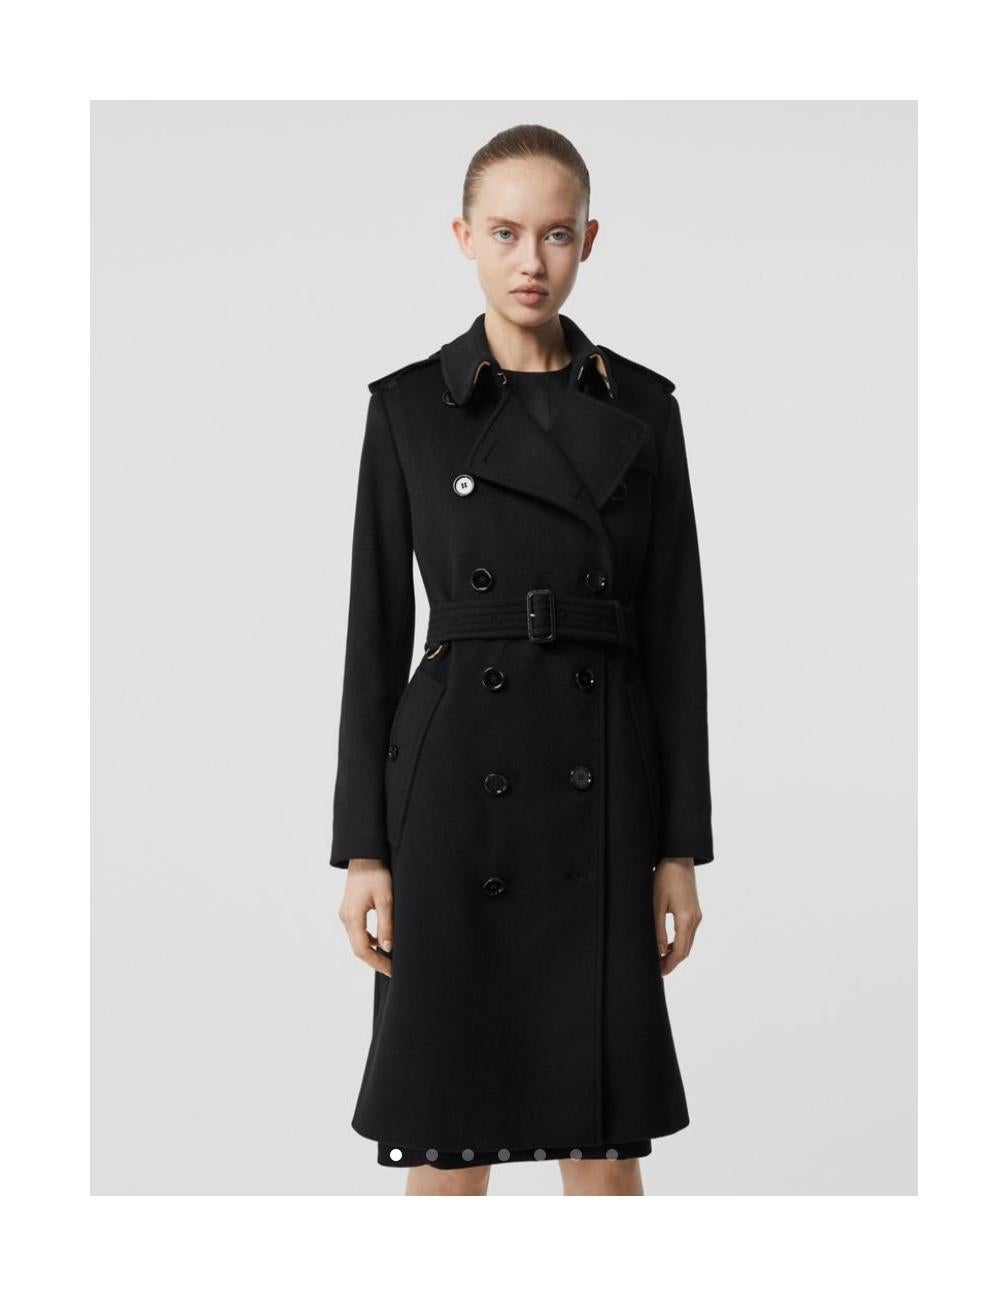 BURBERRY A/W 2019 “Kensington” Black Cashmere Double Breasted Belted Trench Coat 2